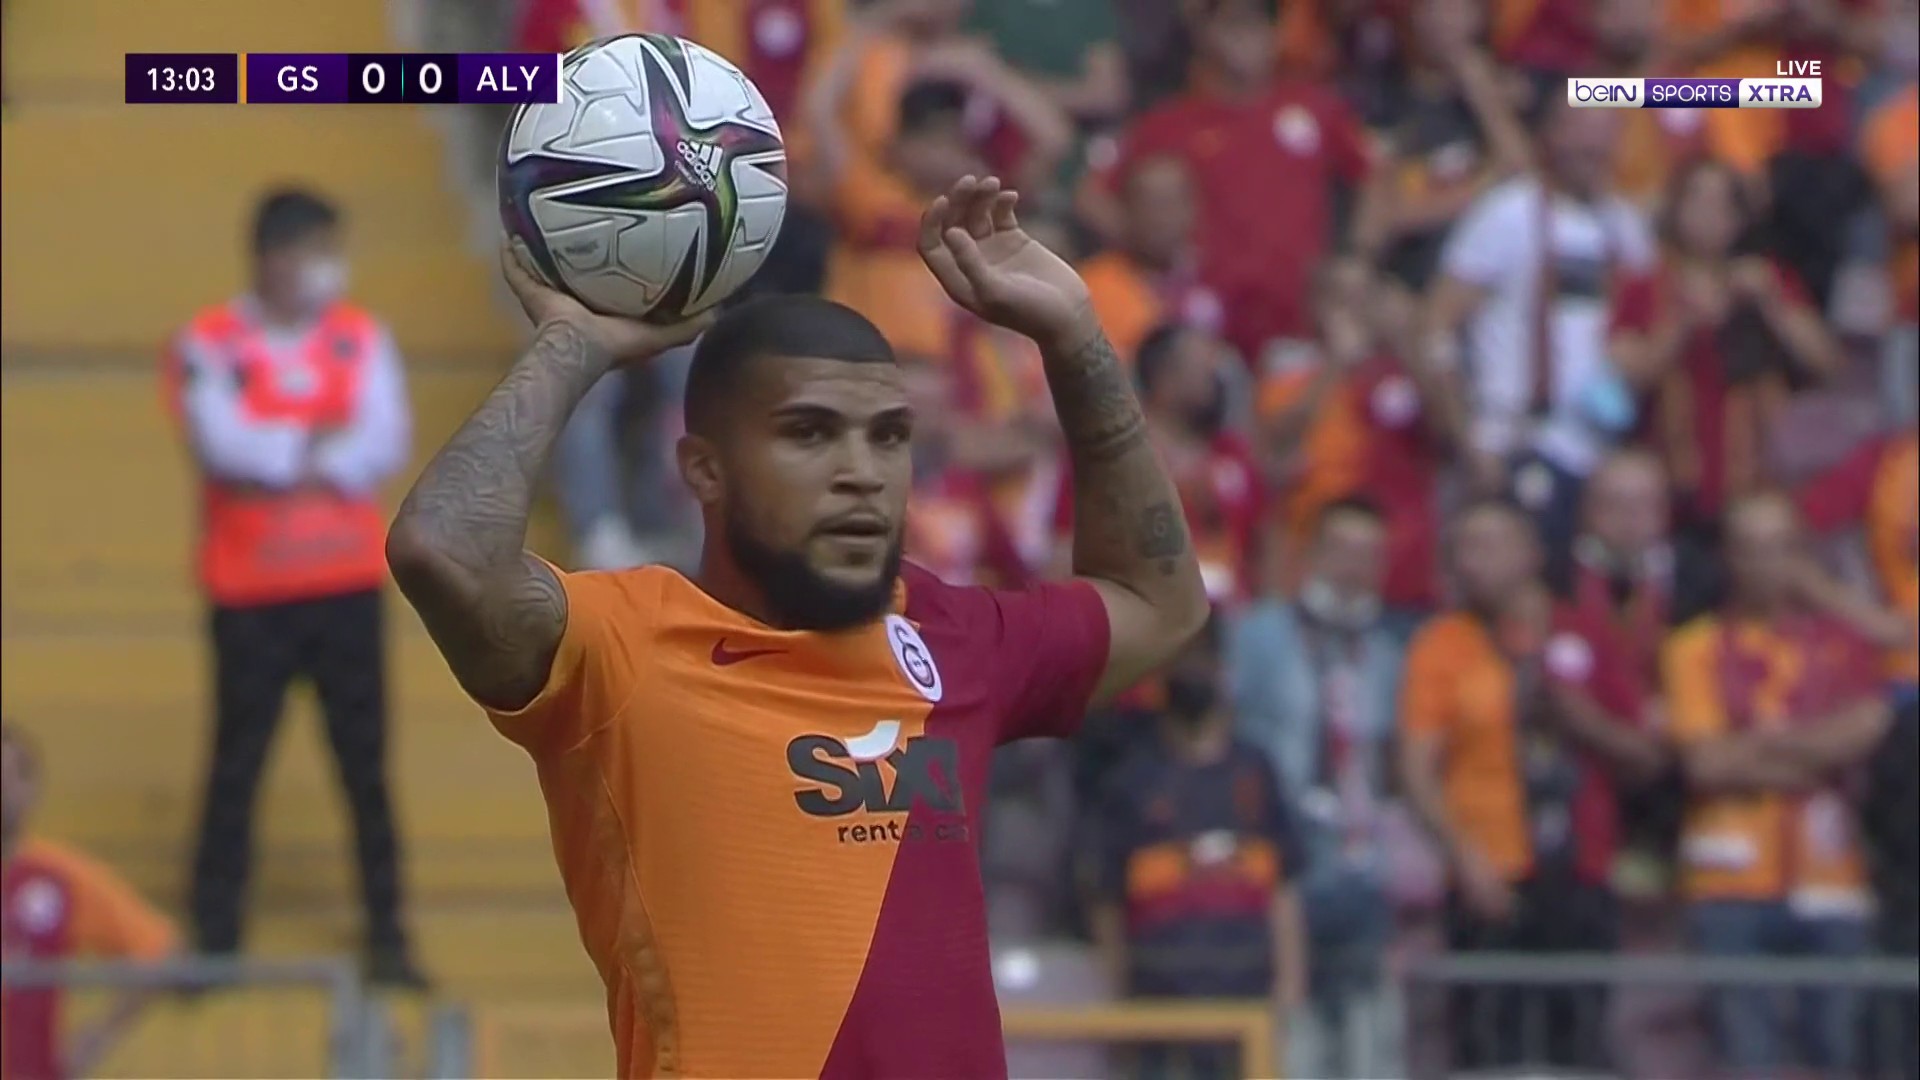 Galatasaray fighting for the top against Alanyaspor